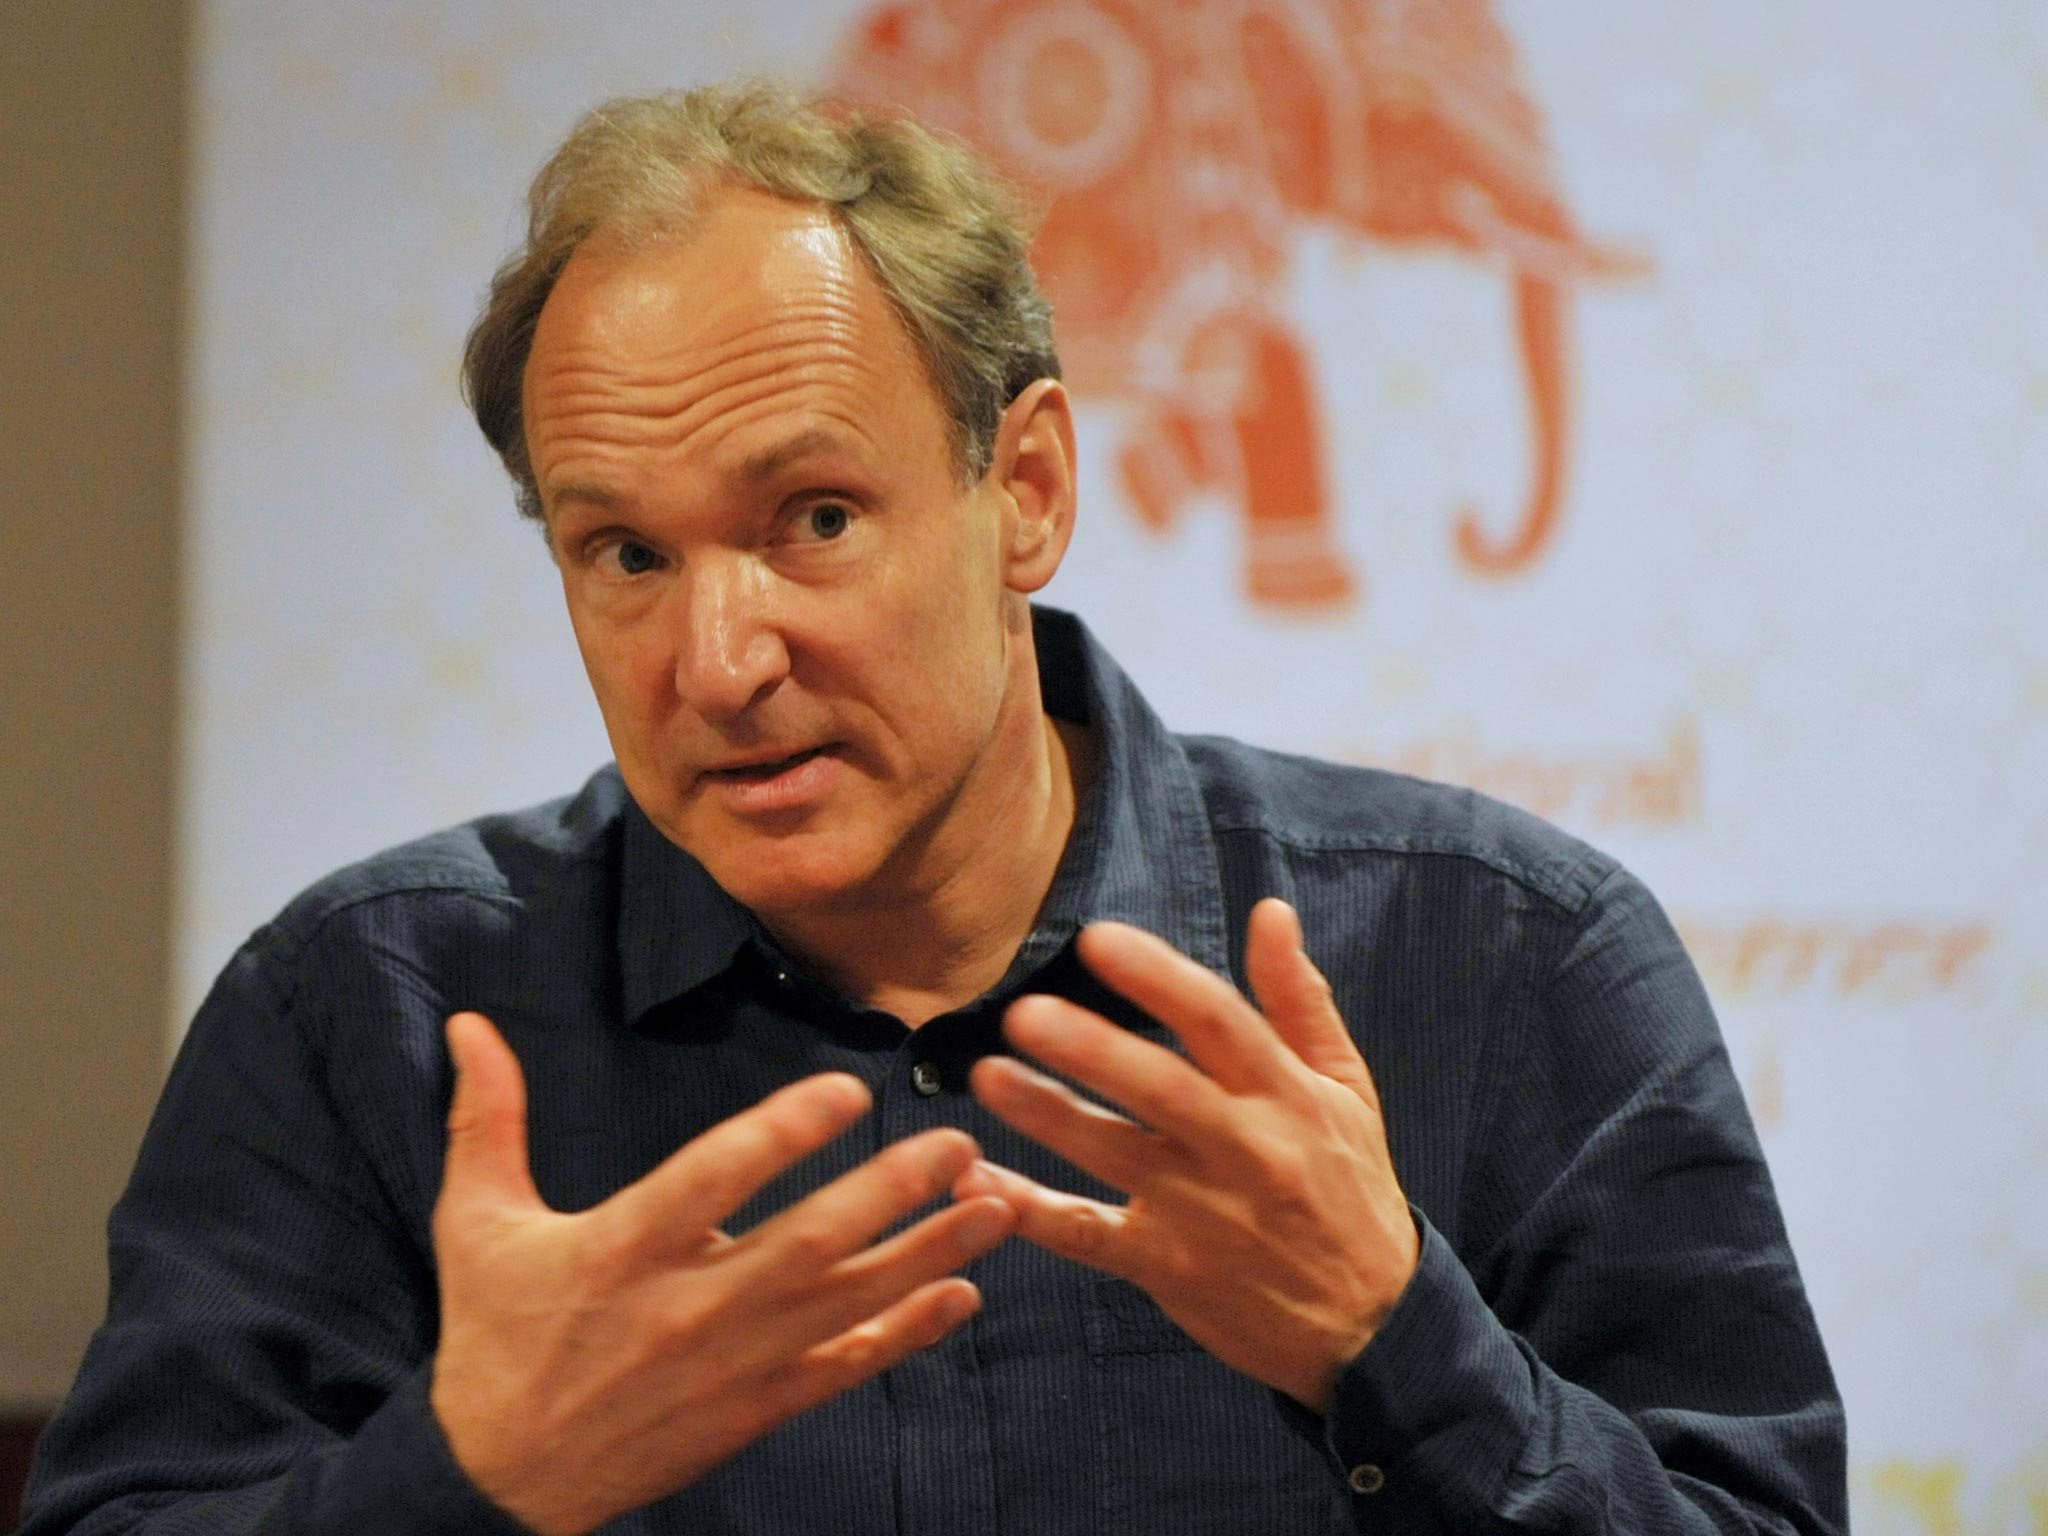 Tim Berners-Lee’s invention put “in motion an irrevocable revolution” (Getty)